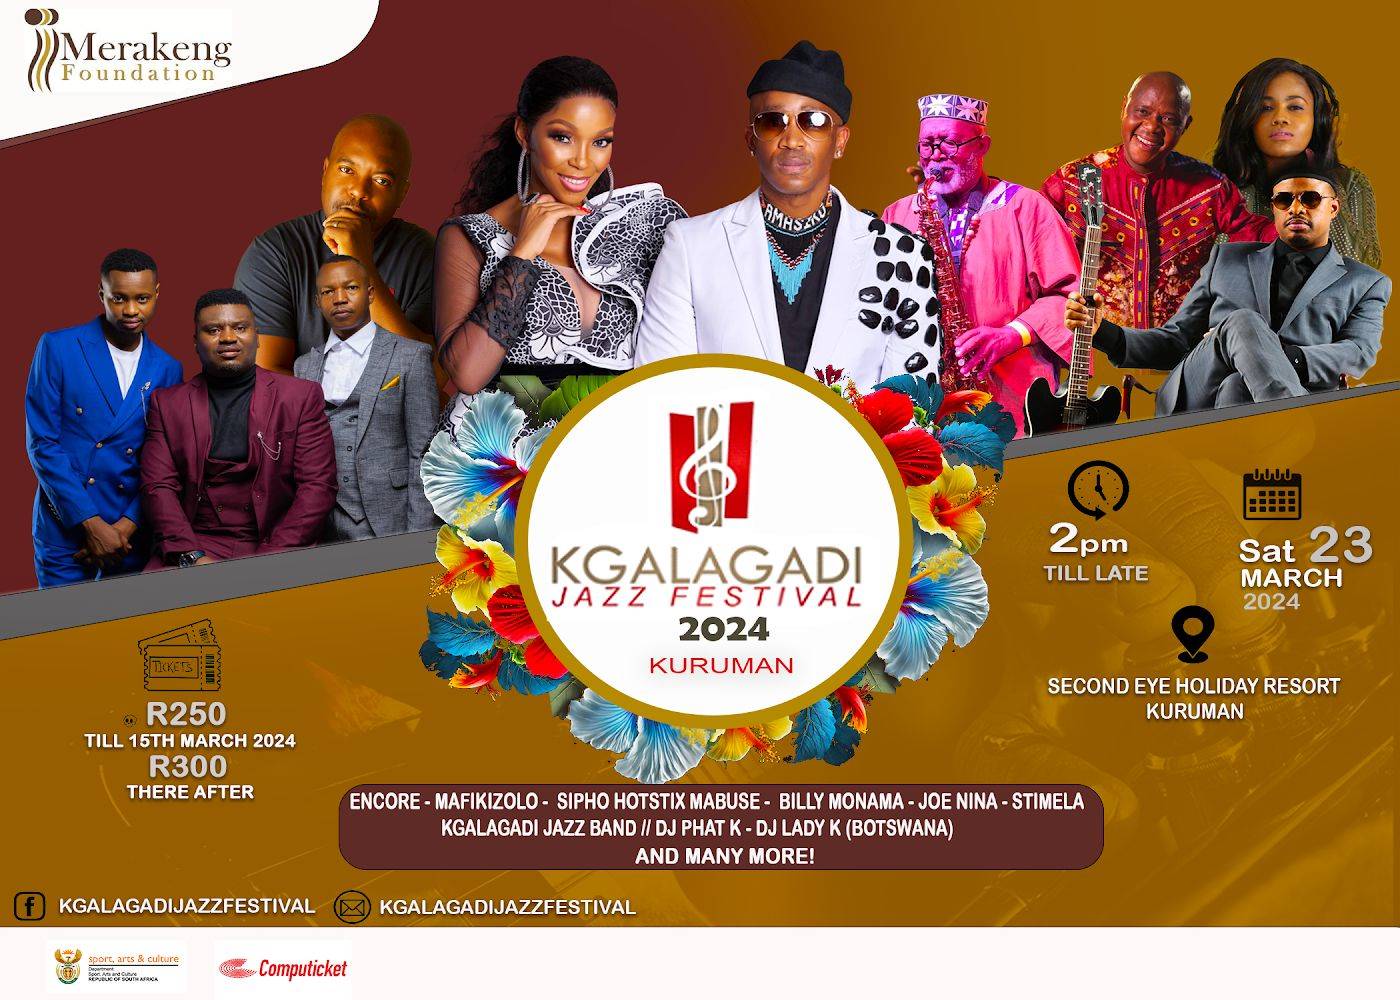 Kgalagadi Jazz Festival promises to be a banger, with some of Mzansi’s most iconic artists